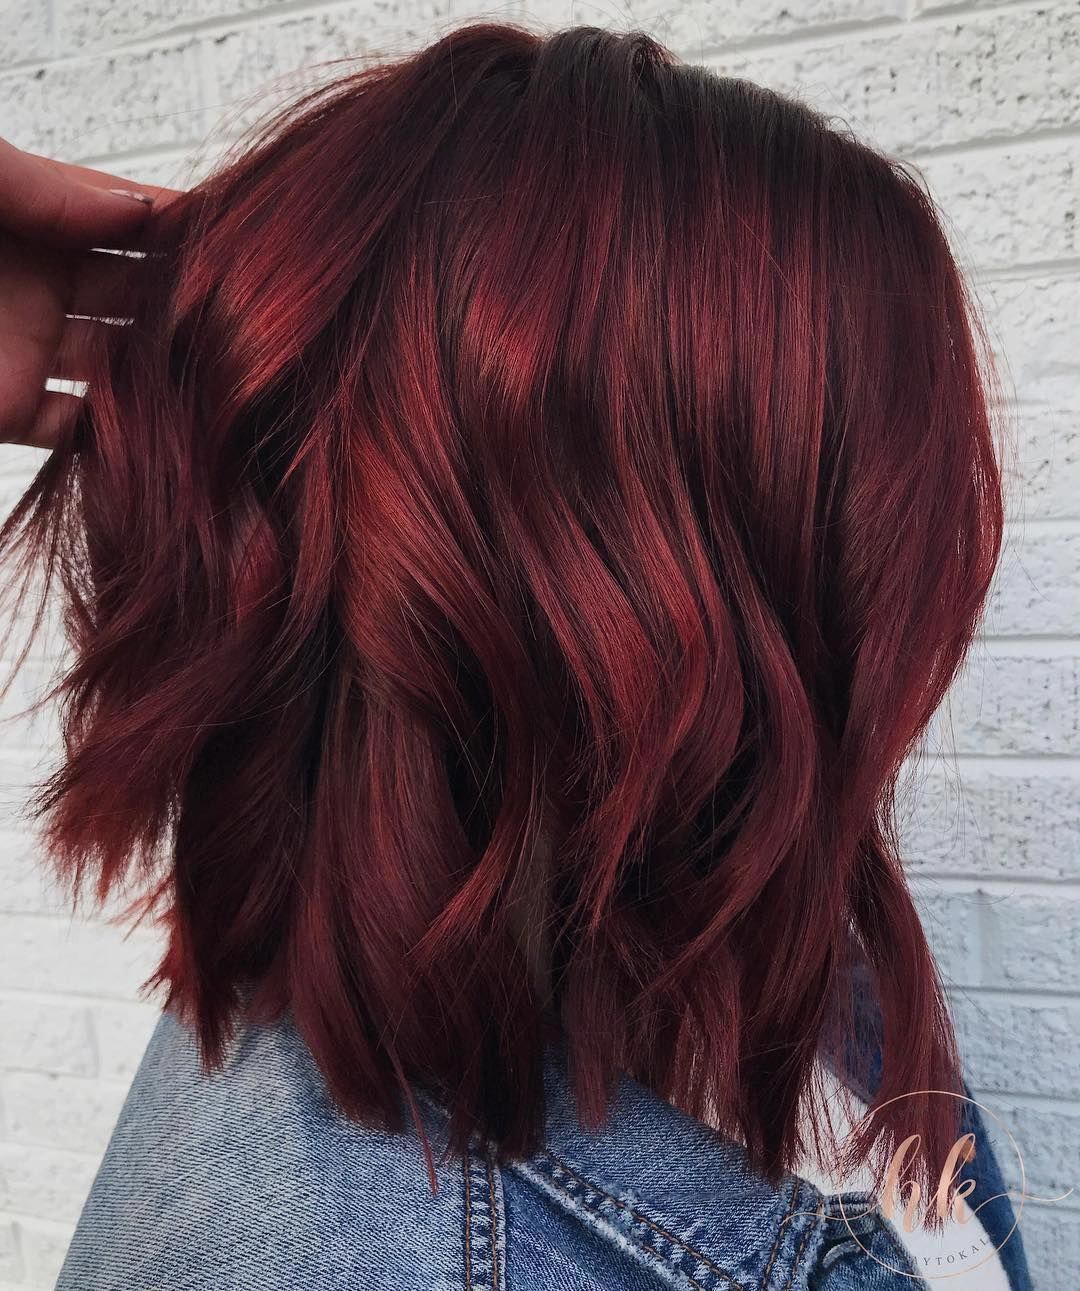 Introducing the new drink-inspired hair-color trend, "mulled wine hair." Check o...